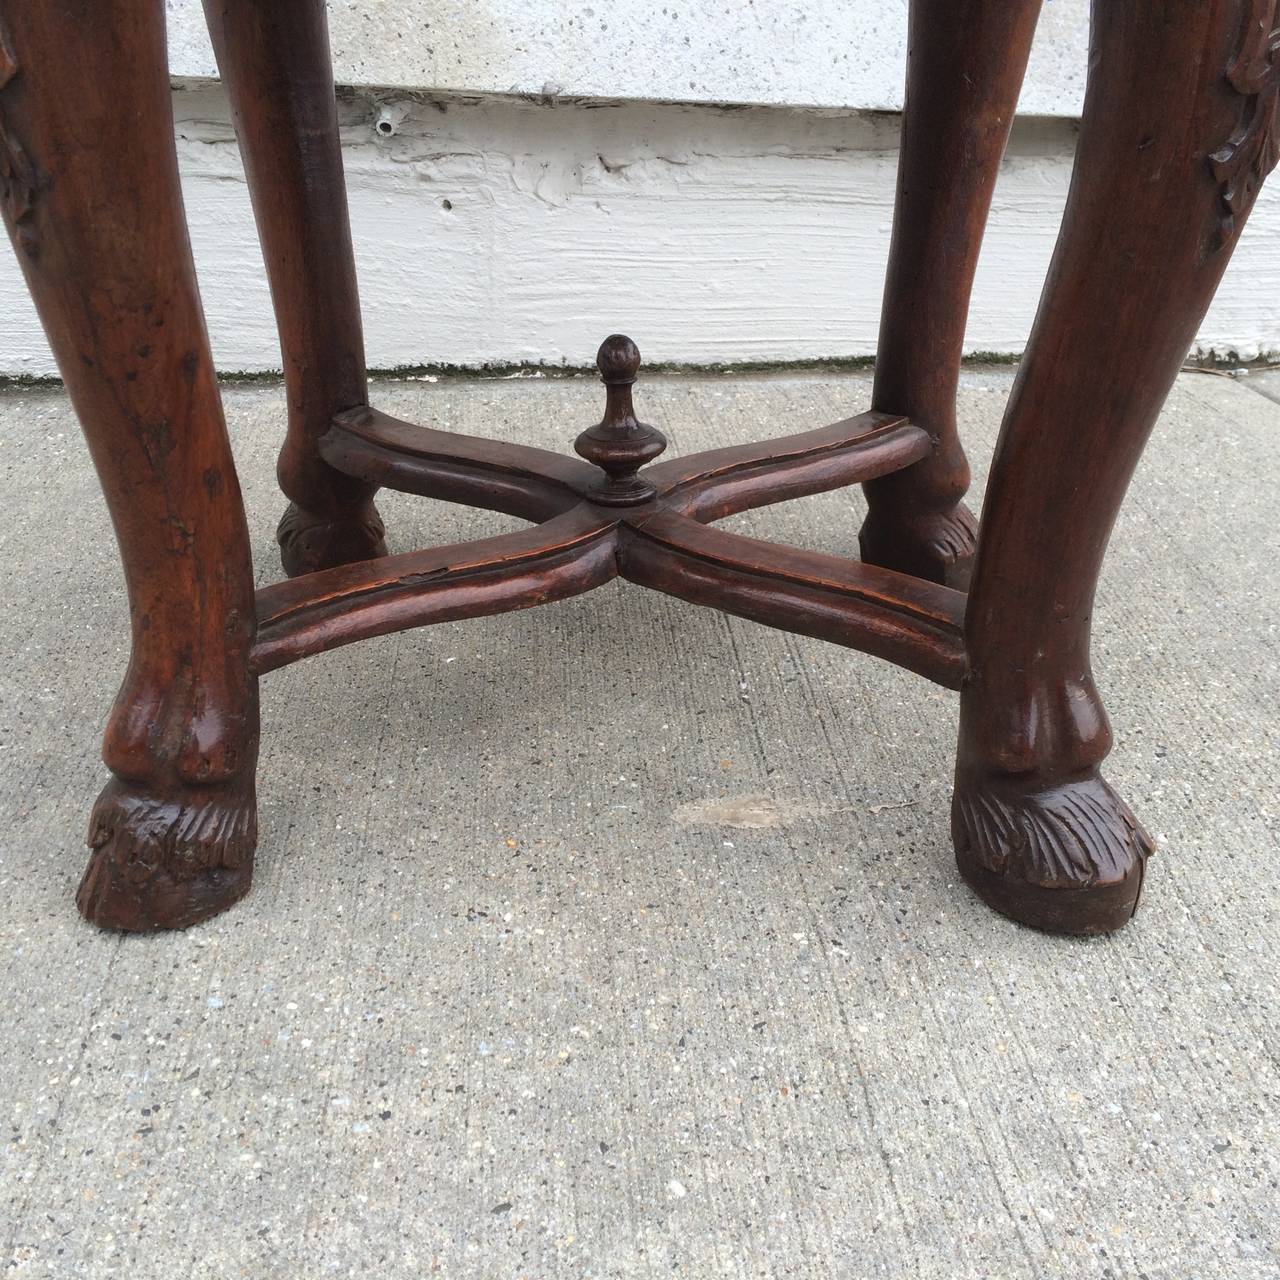 A fine 18th century Italian Baroque walnut stool with cabriole legs joined by an X-form stretcher ending in hoof feet. With blue and green Fortuny upholstery. Sturdy and quite comfortable. 